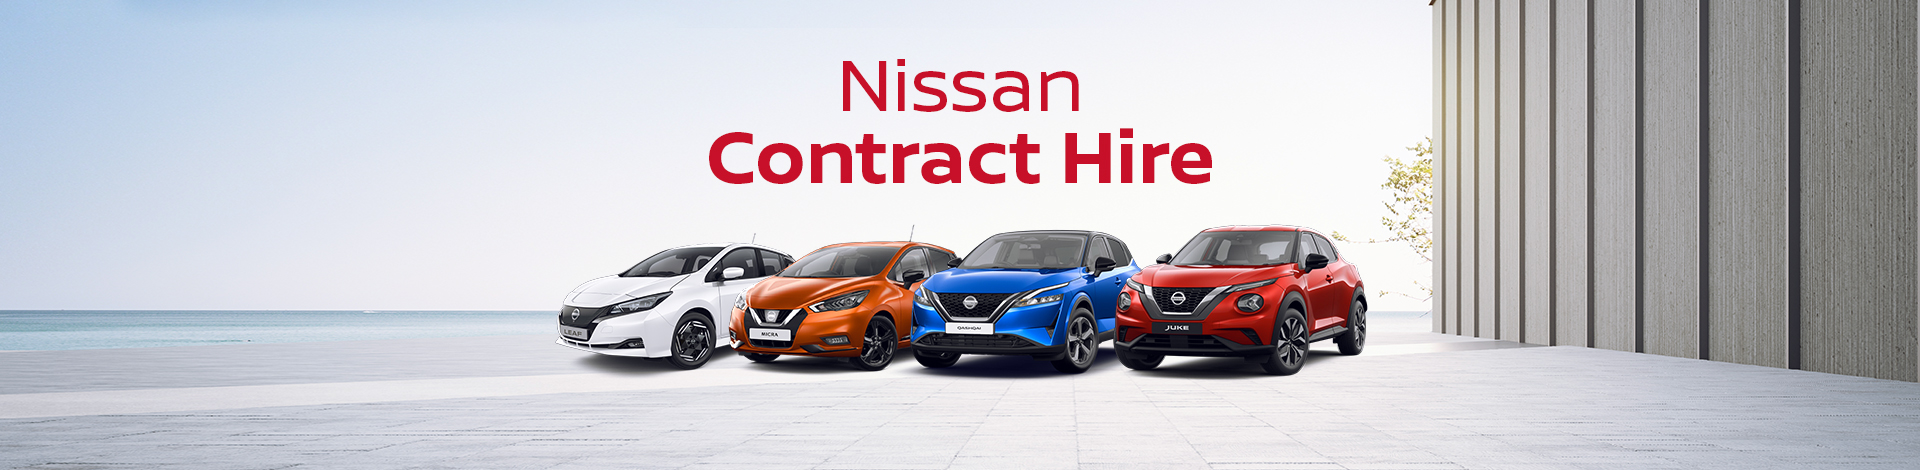 Nissan Contract Hire Banner